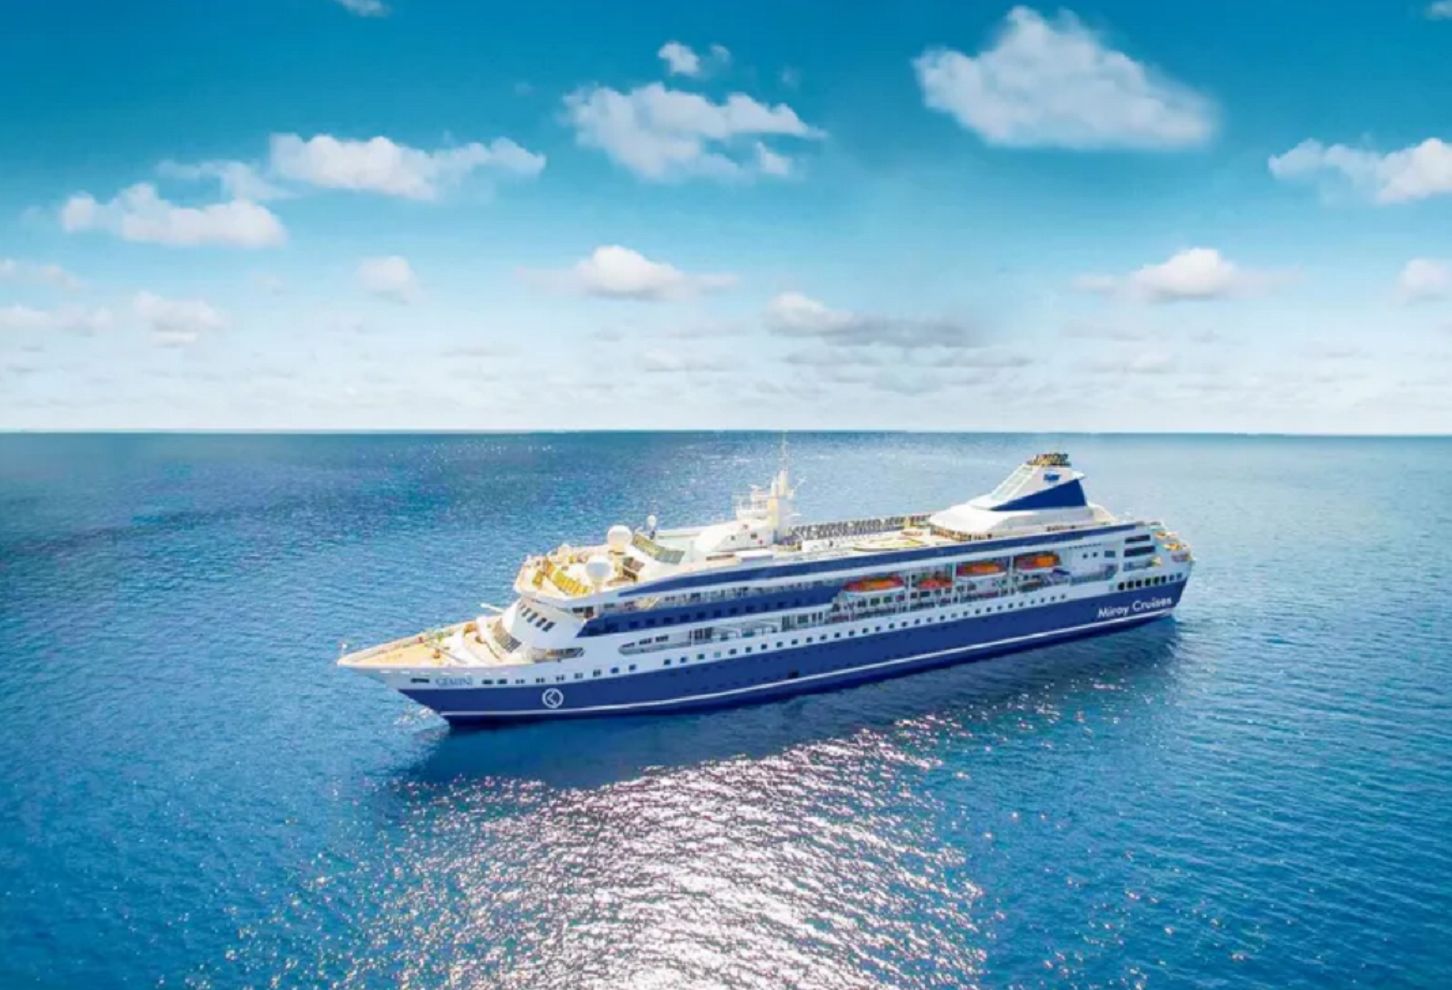 It was supposed to be a three-year cruise on a luxury ship.  Now they have nowhere to live